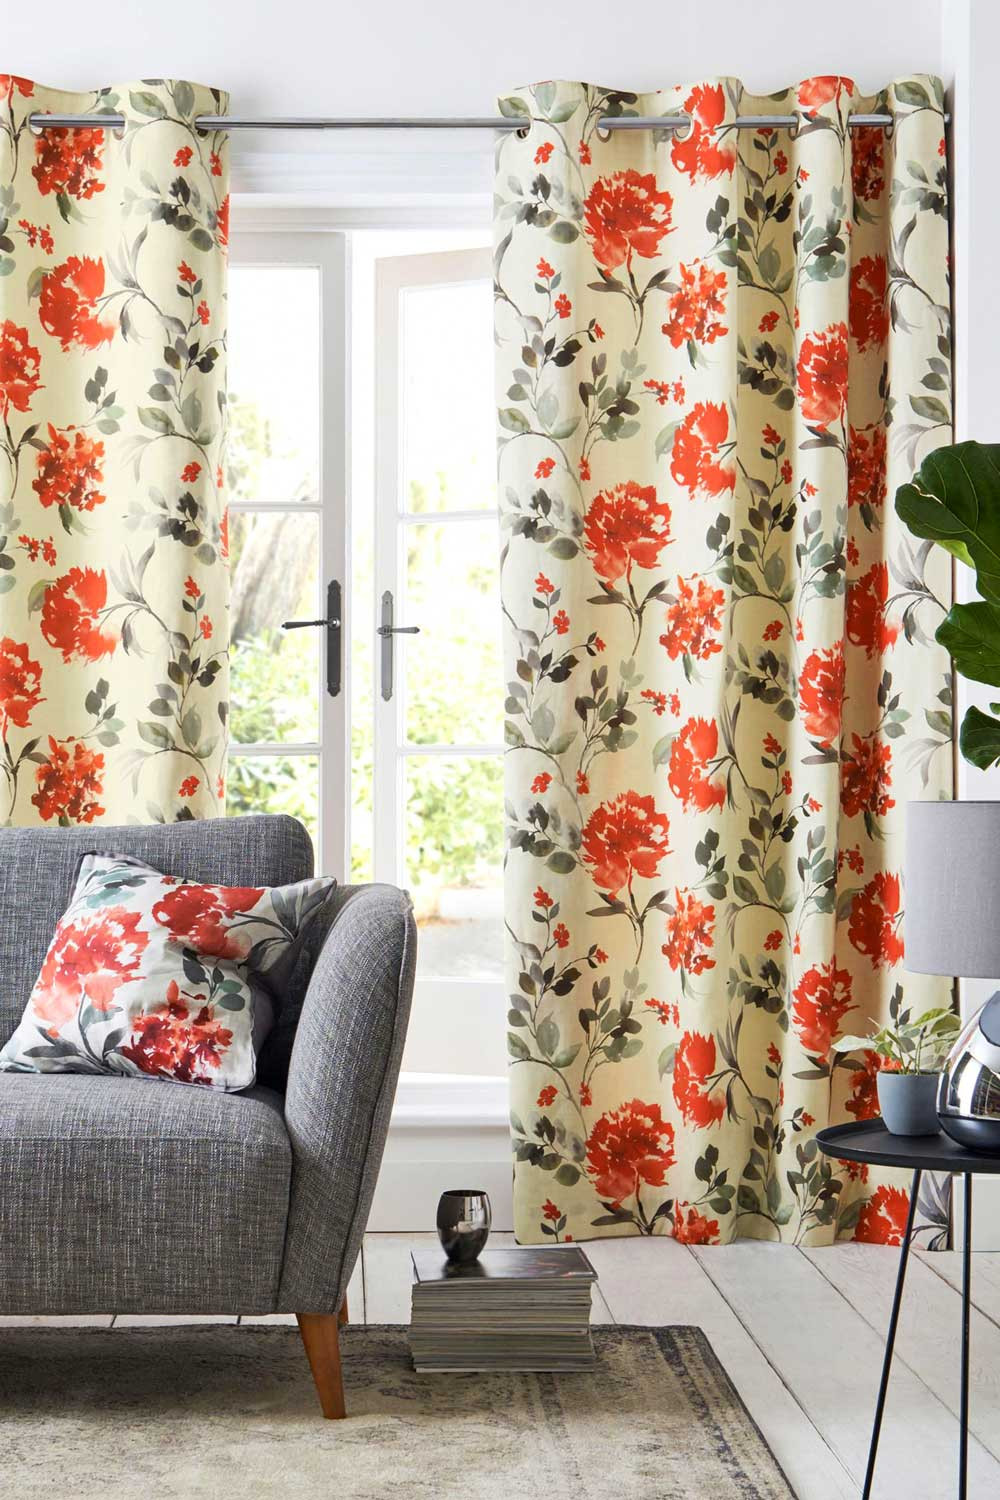 Pretty Curtains For Living Room
 30 Beautiful Living Room Curtain Ideas and Patterns